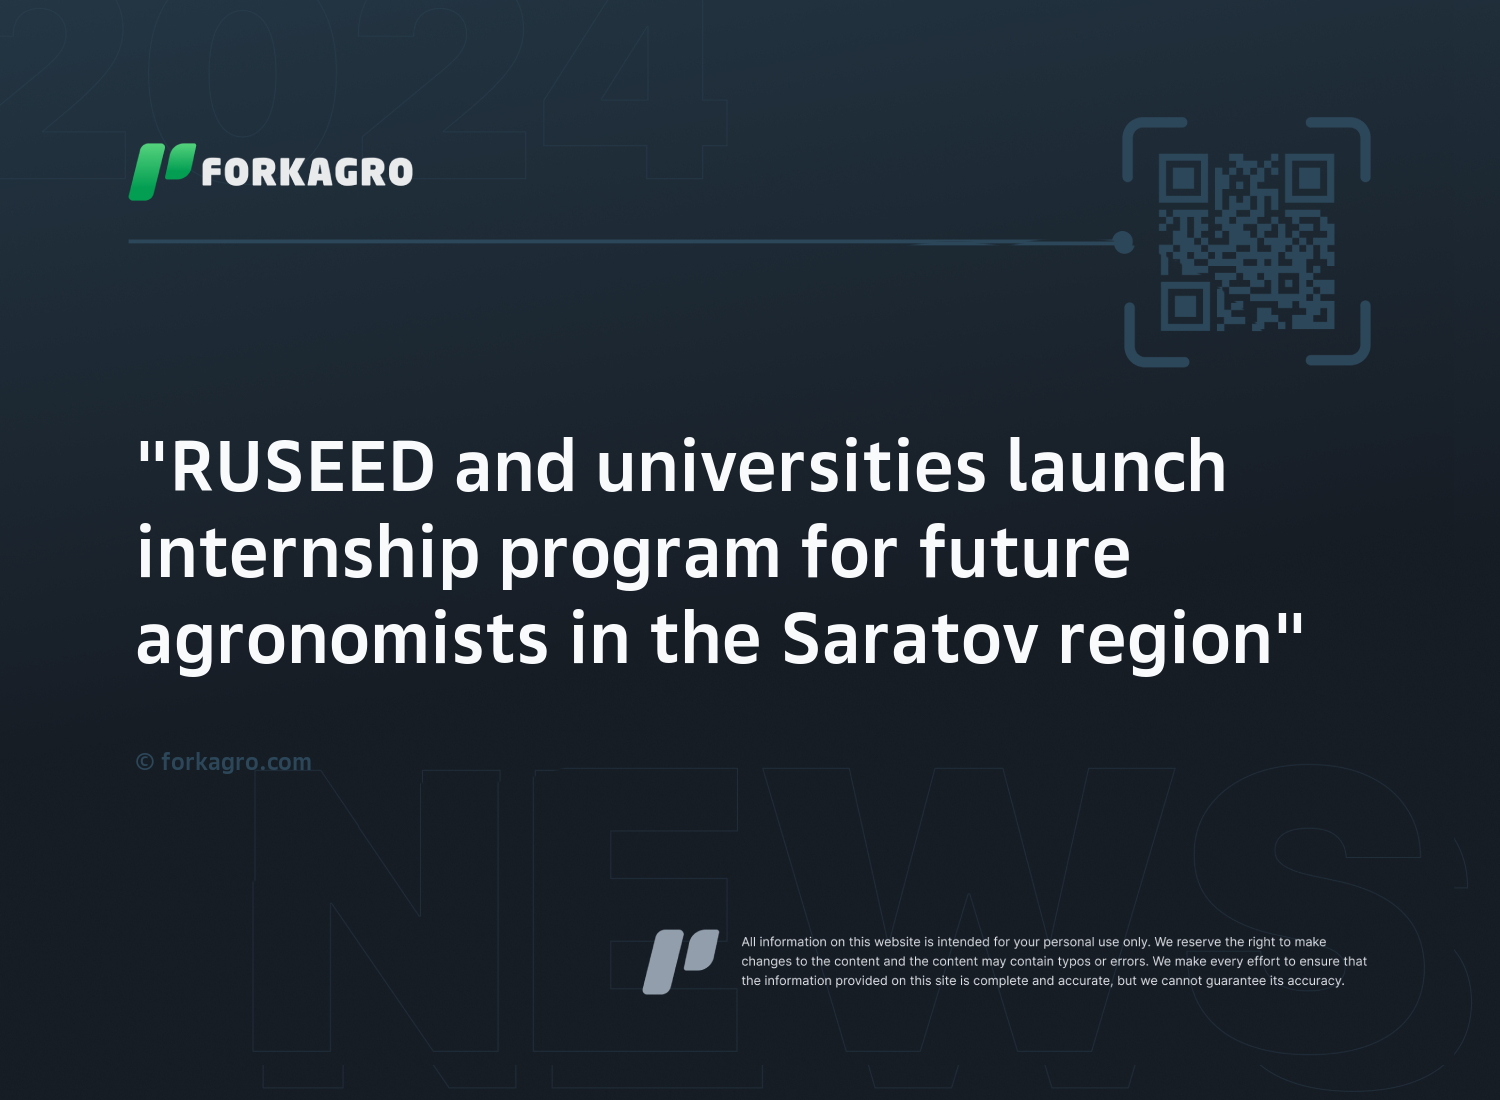 "RUSEED and universities launch internship program for future agronomists in the Saratov region"